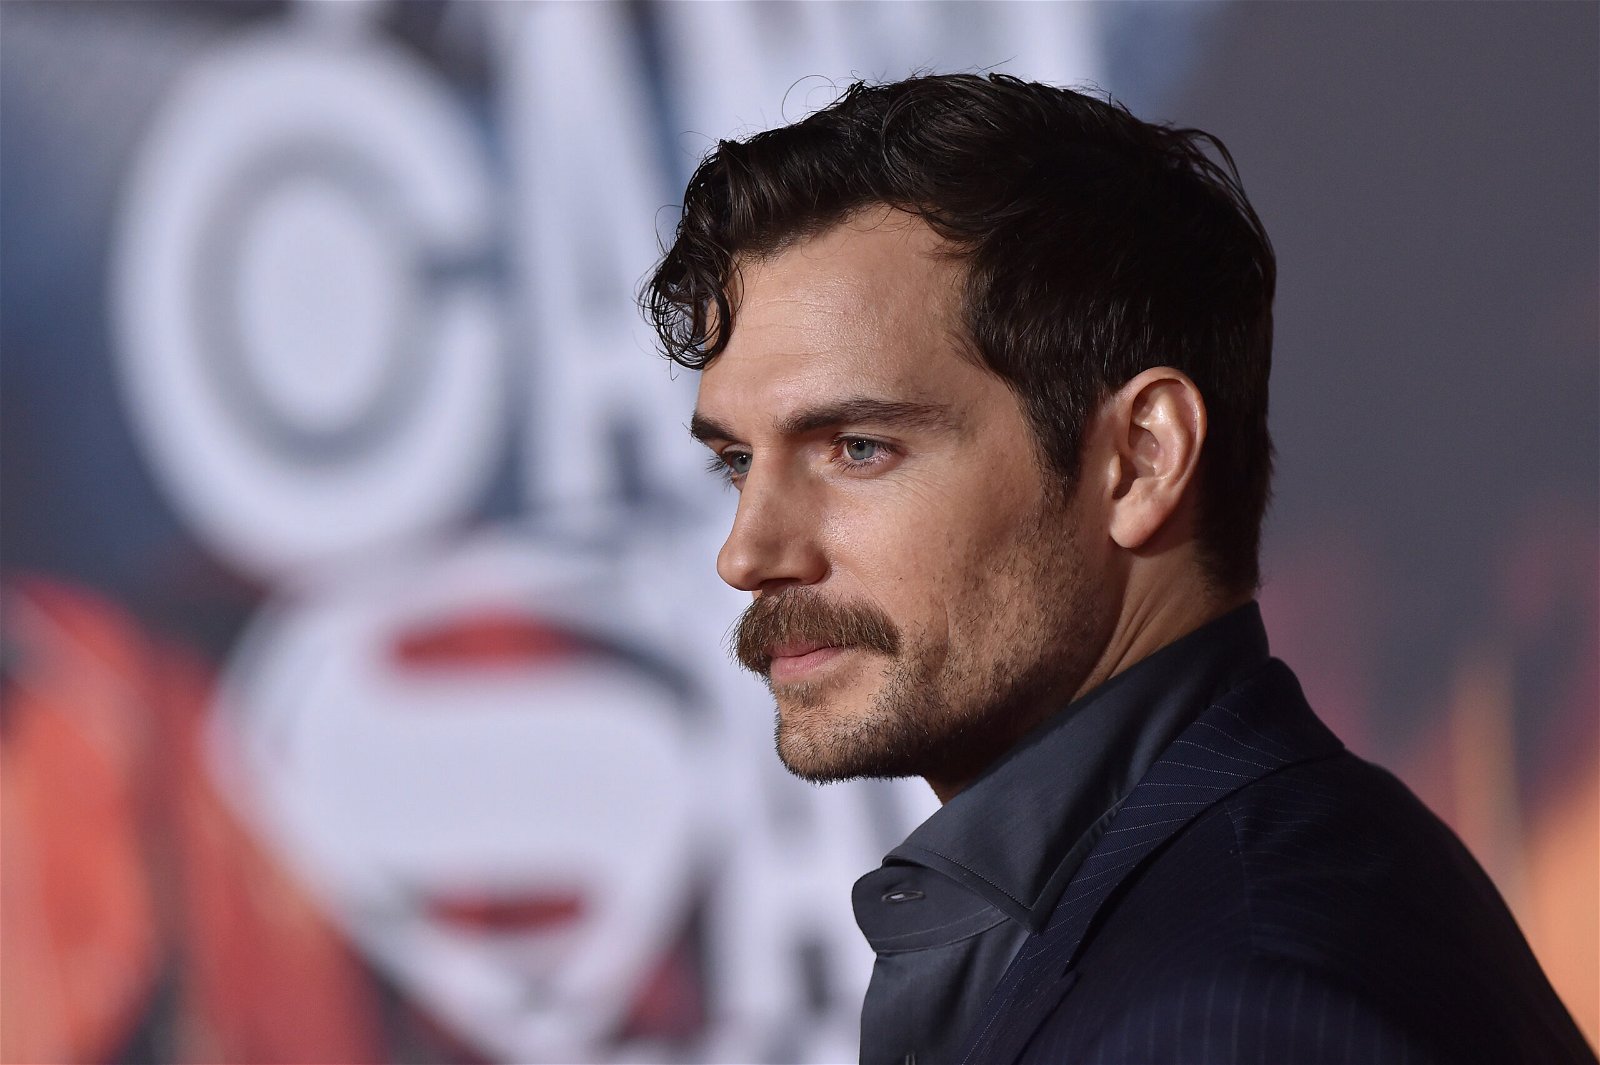 Henry Cavill was suprised with his mustache going viral